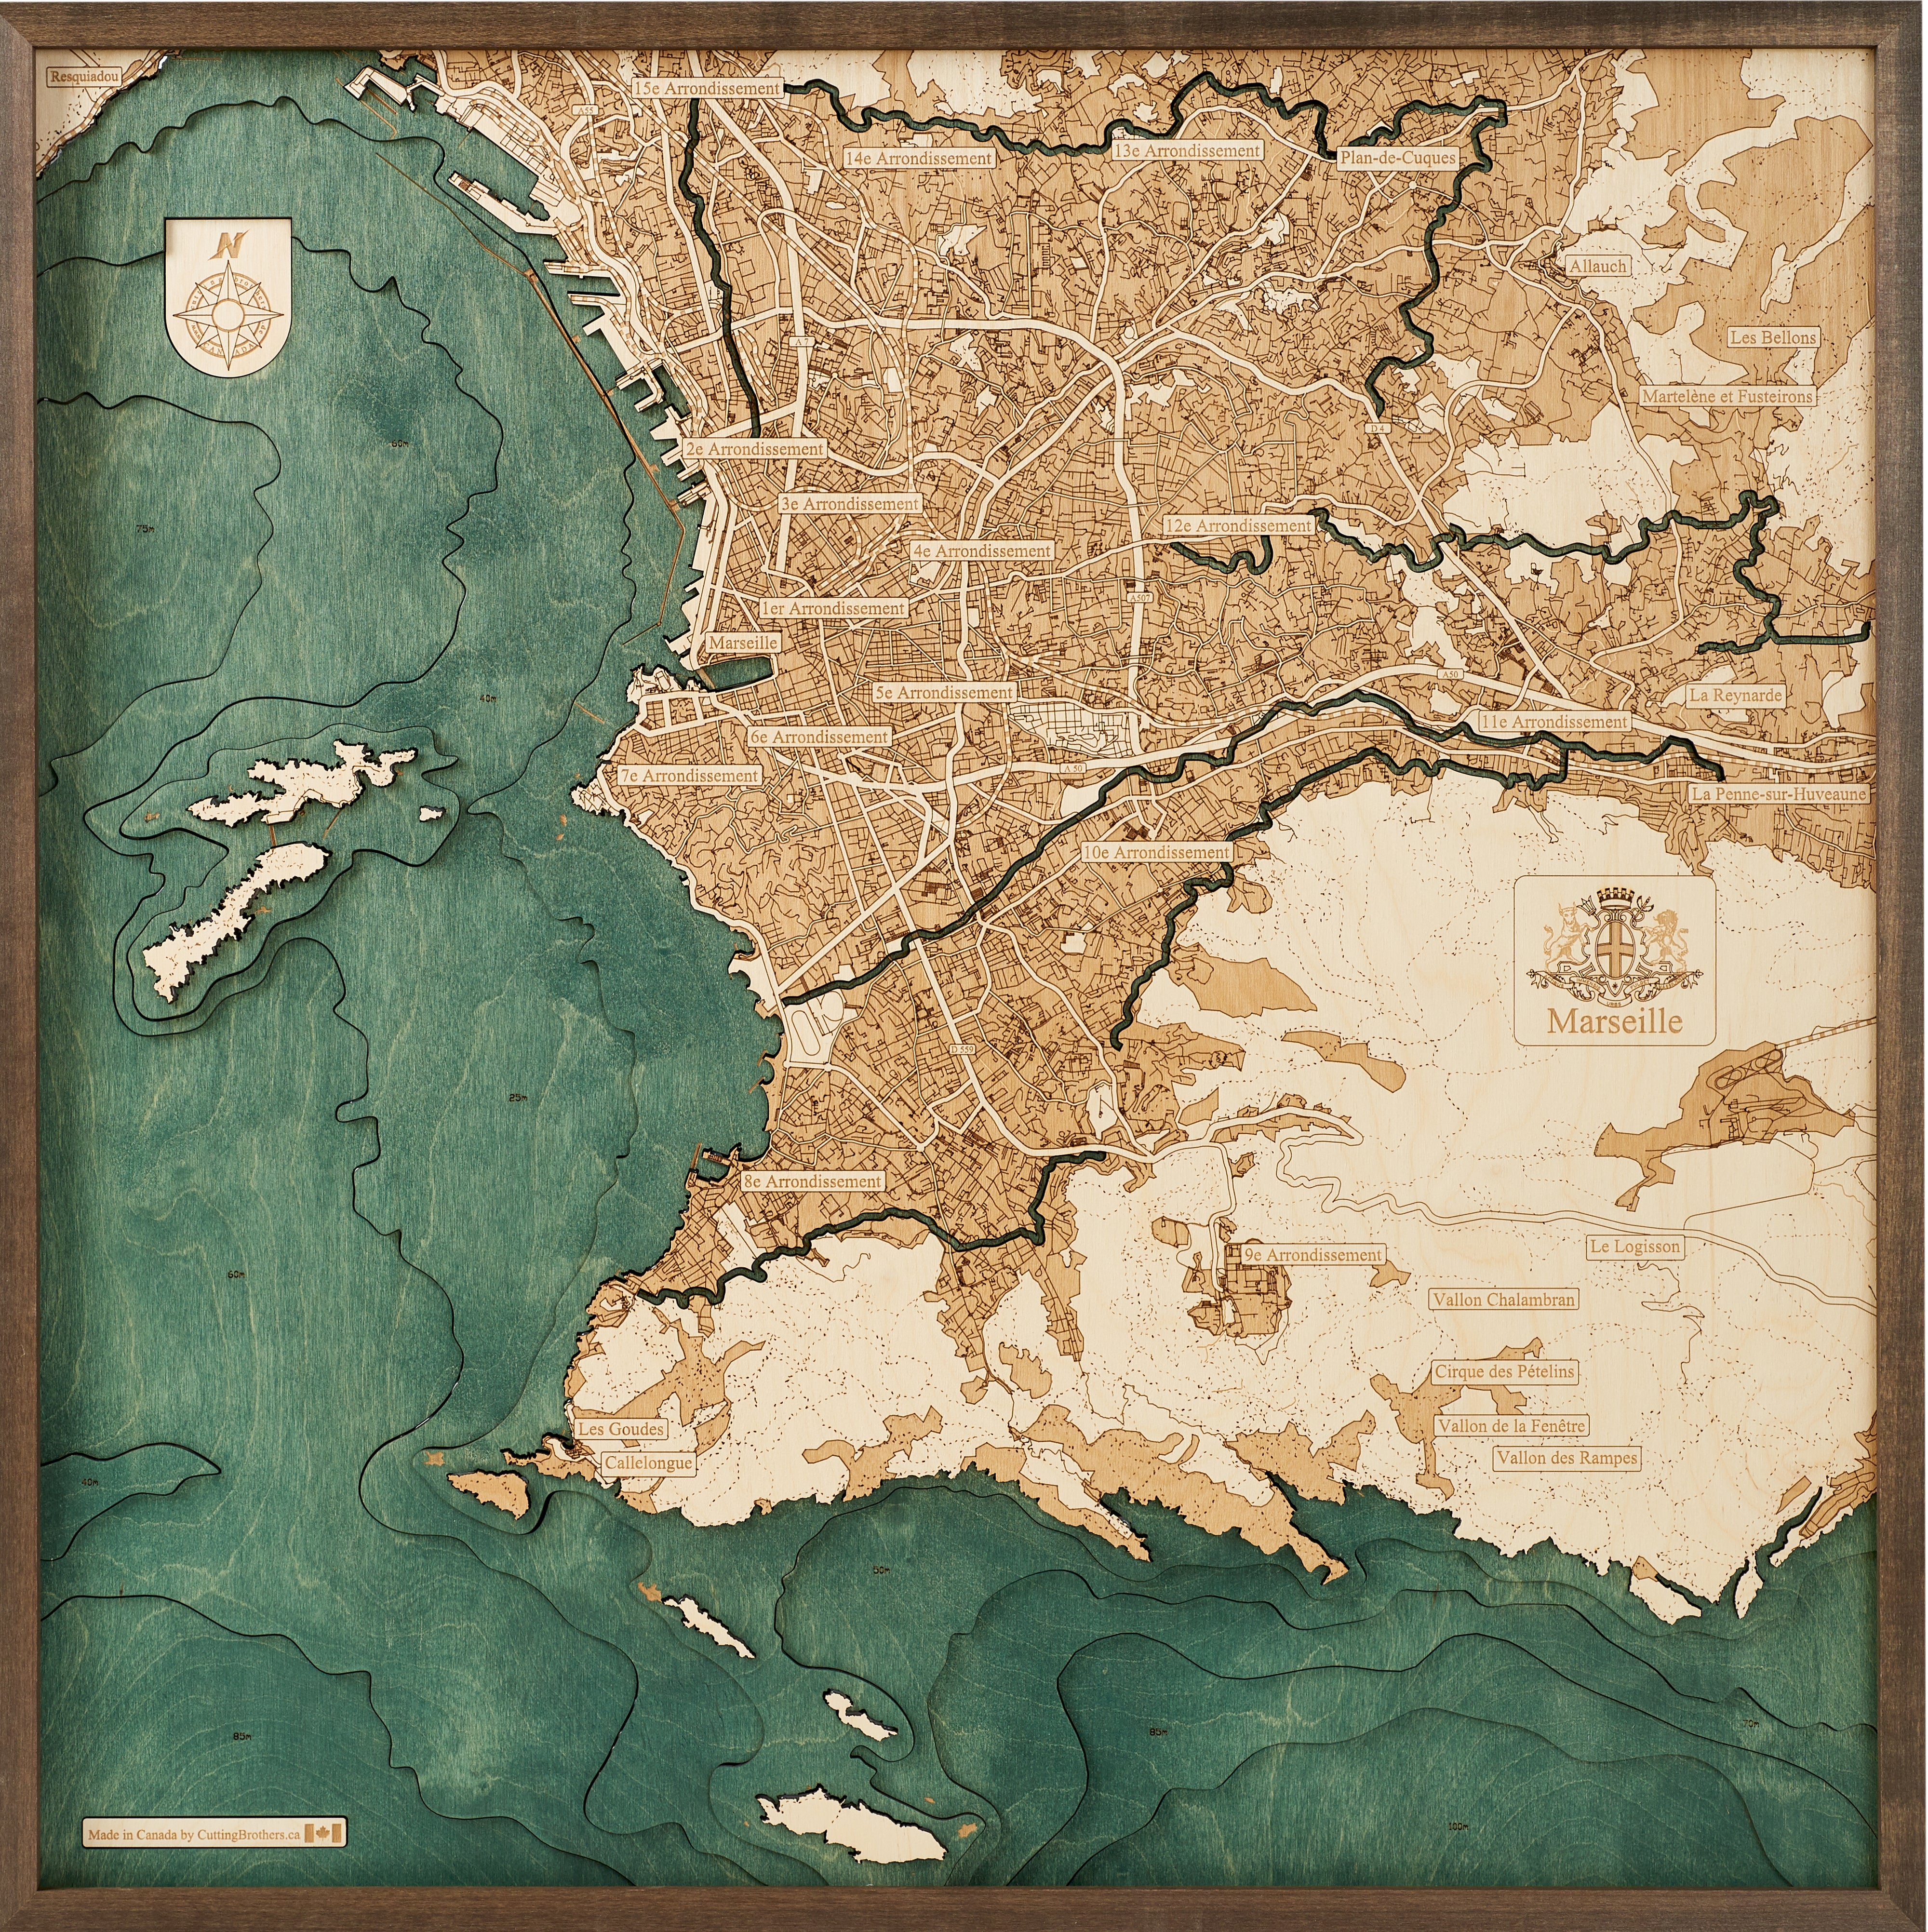 MARSEILLE 3D wooden wall map - version L 